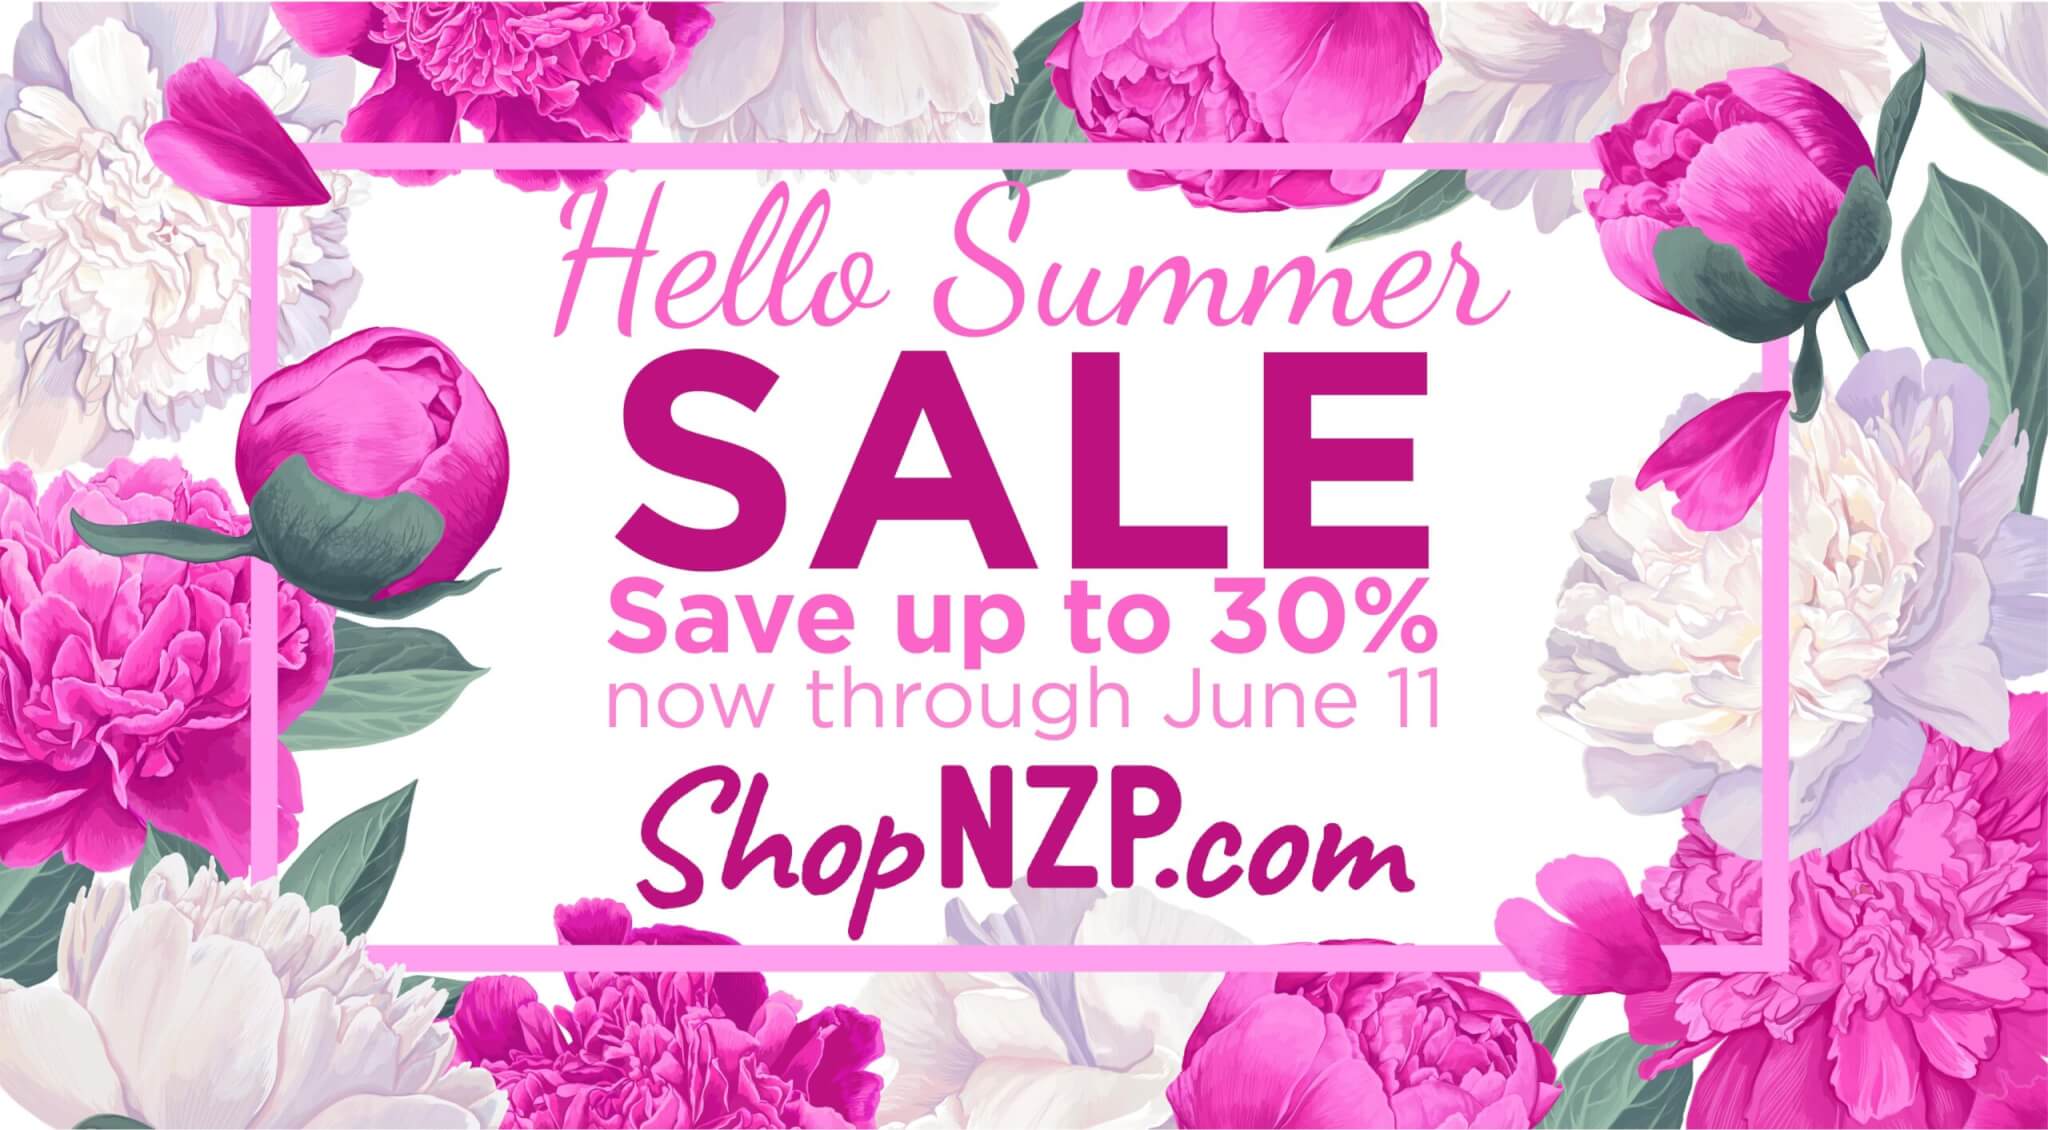 June Welcome Summer Sale now through June 11 Save up to 30 Percent Off at Nancy Zieman Productions at ShopNZP.com